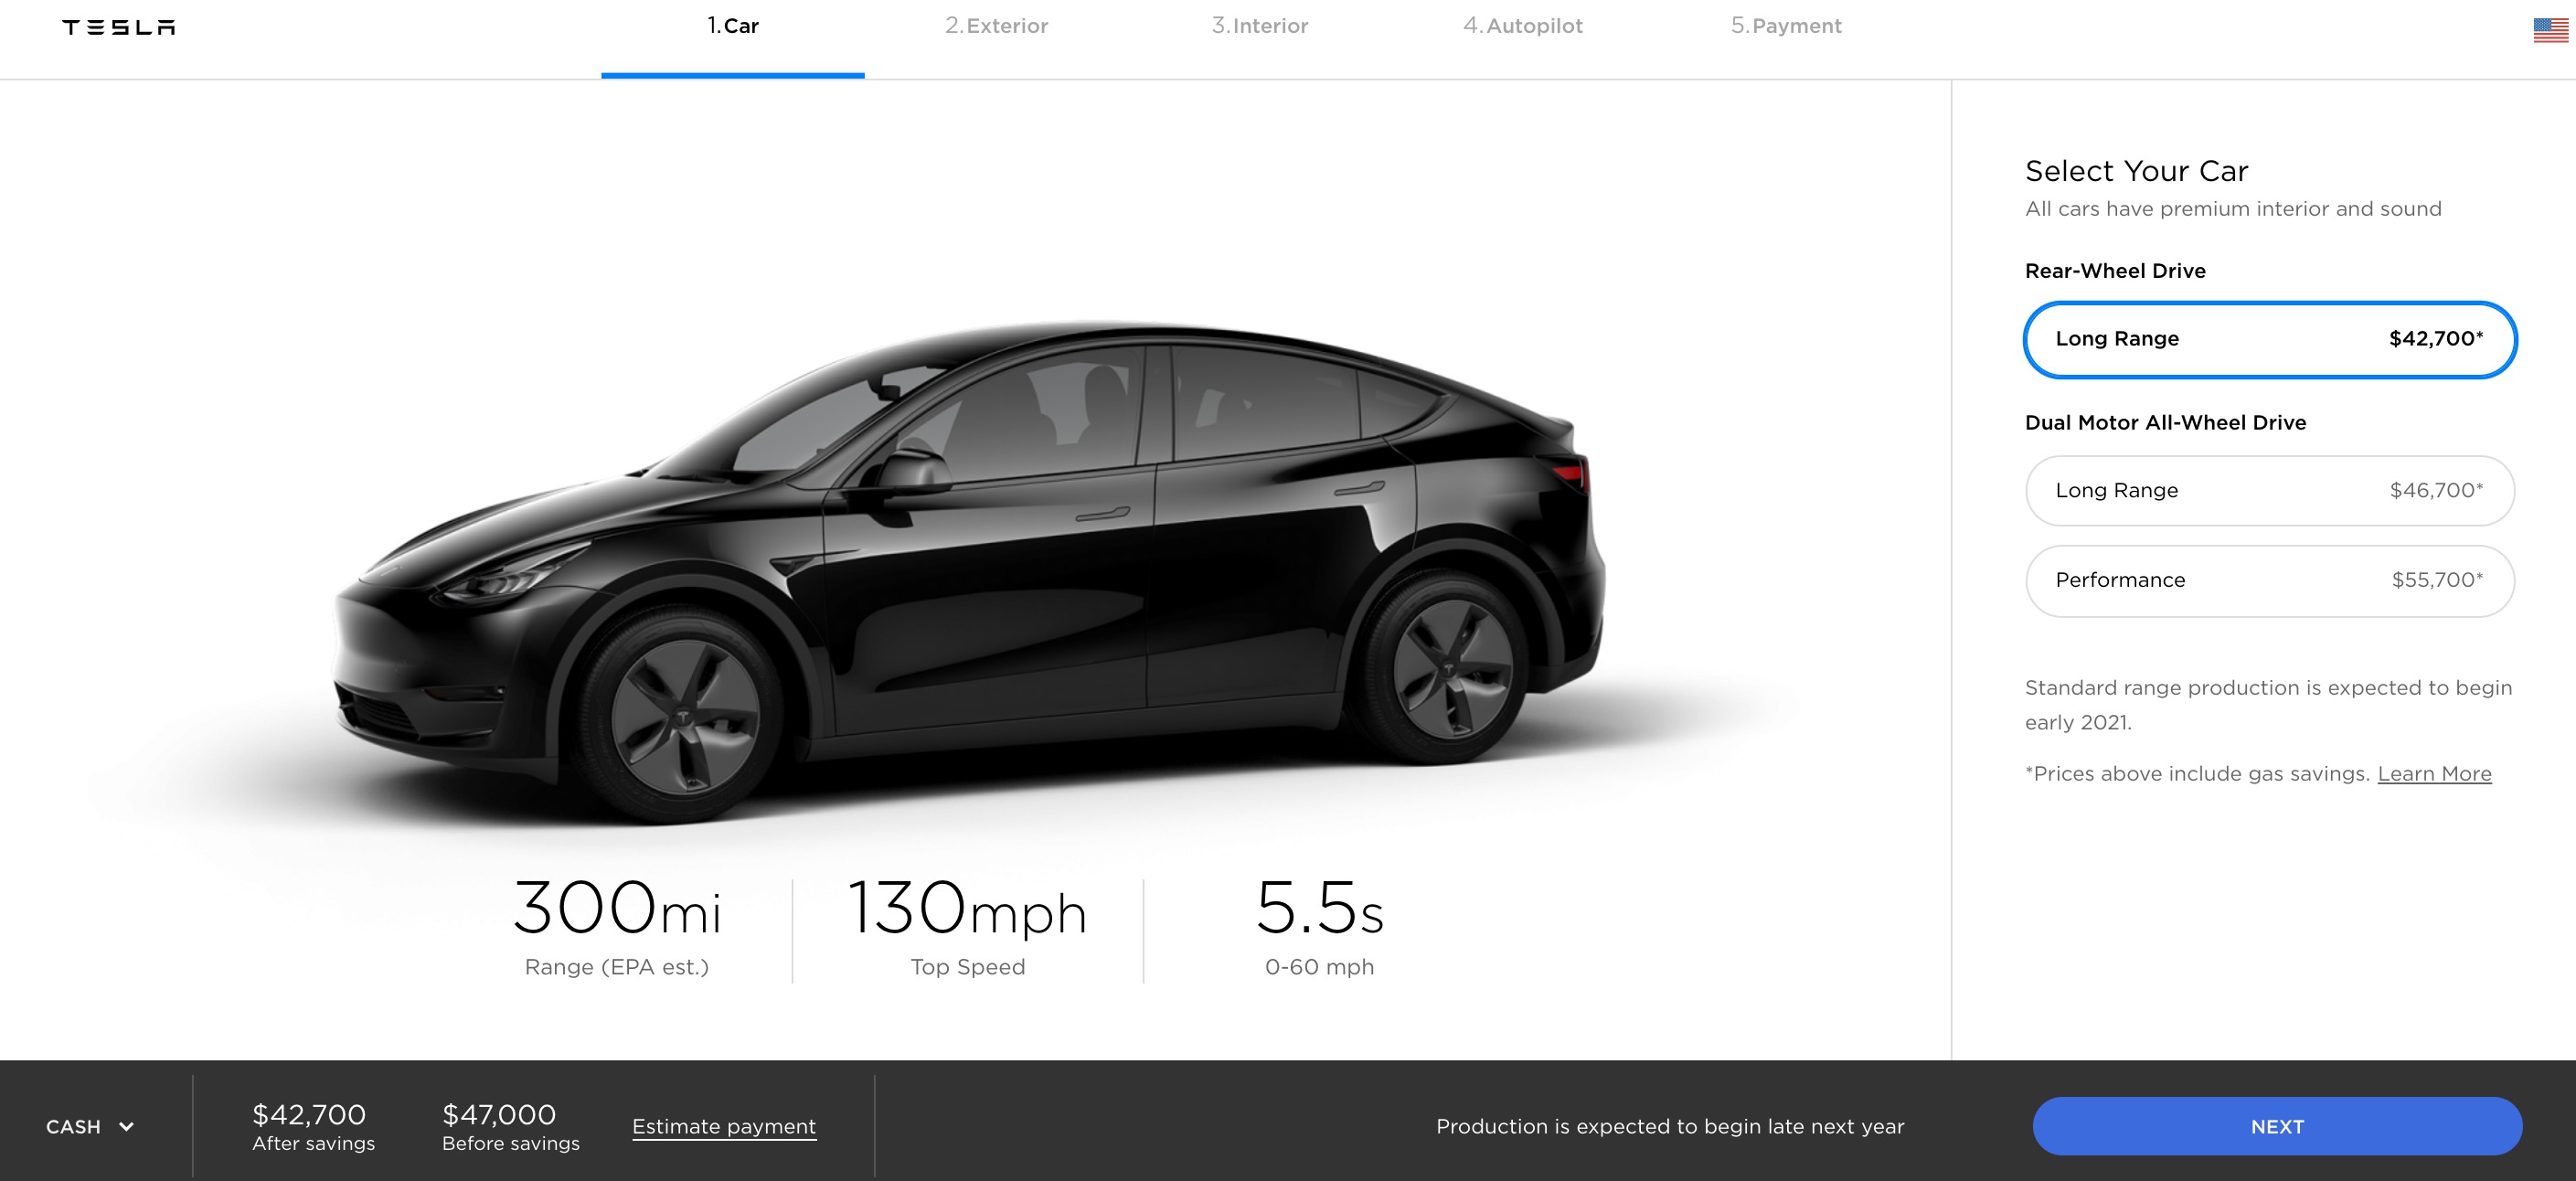 Tesla Unveils Model Y Electric Suv With 300 Miles Range And